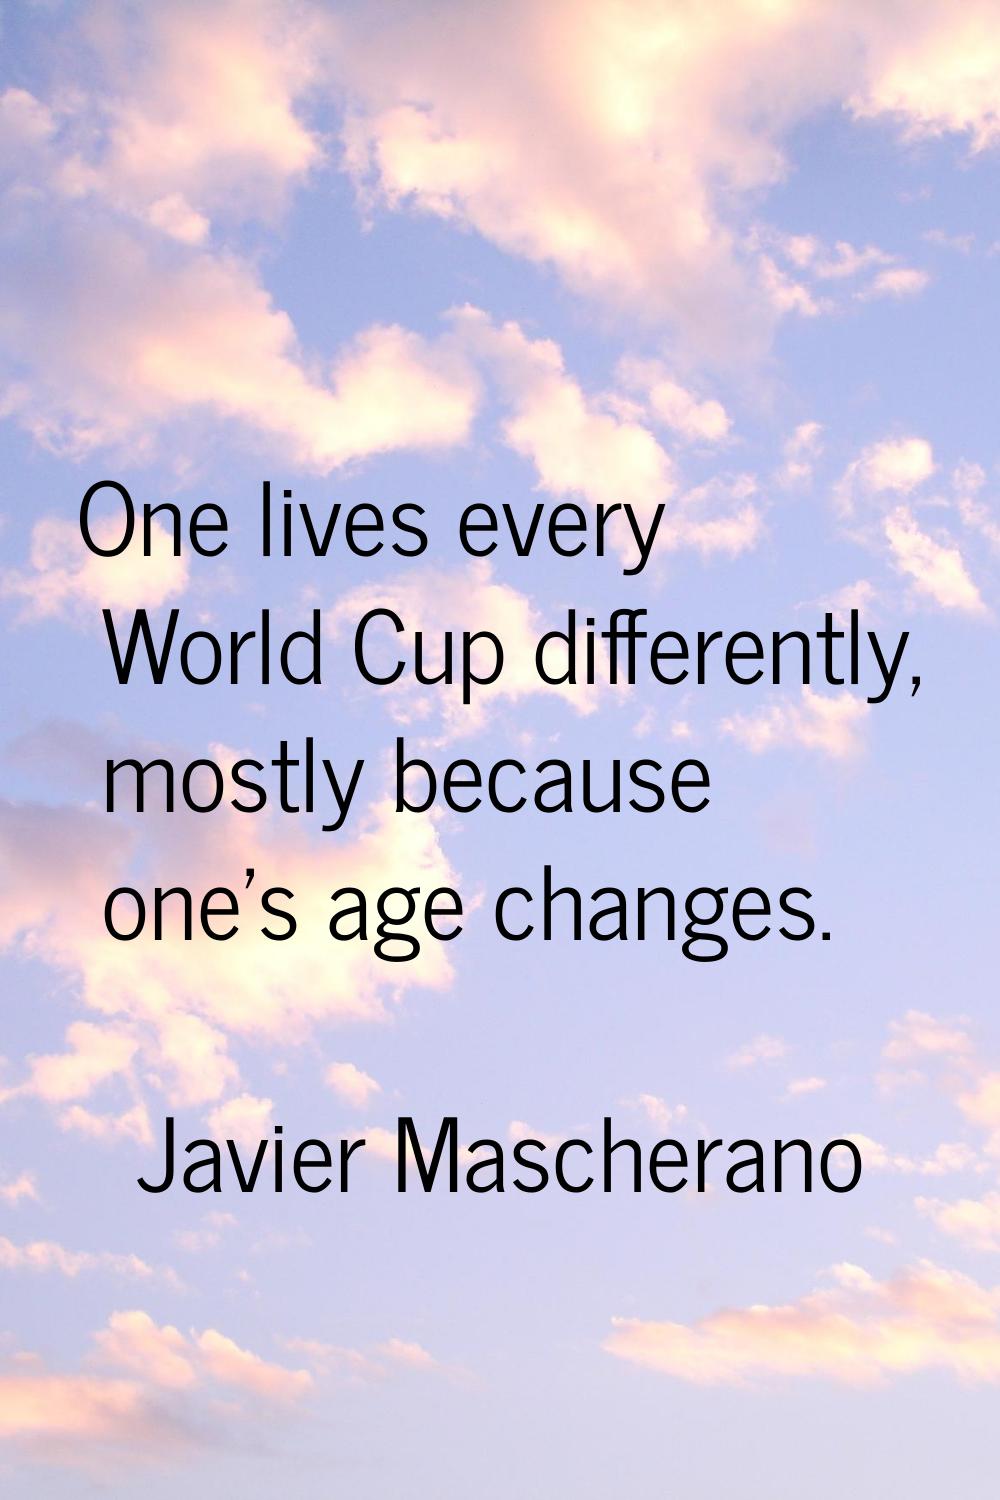 One lives every World Cup differently, mostly because one's age changes.